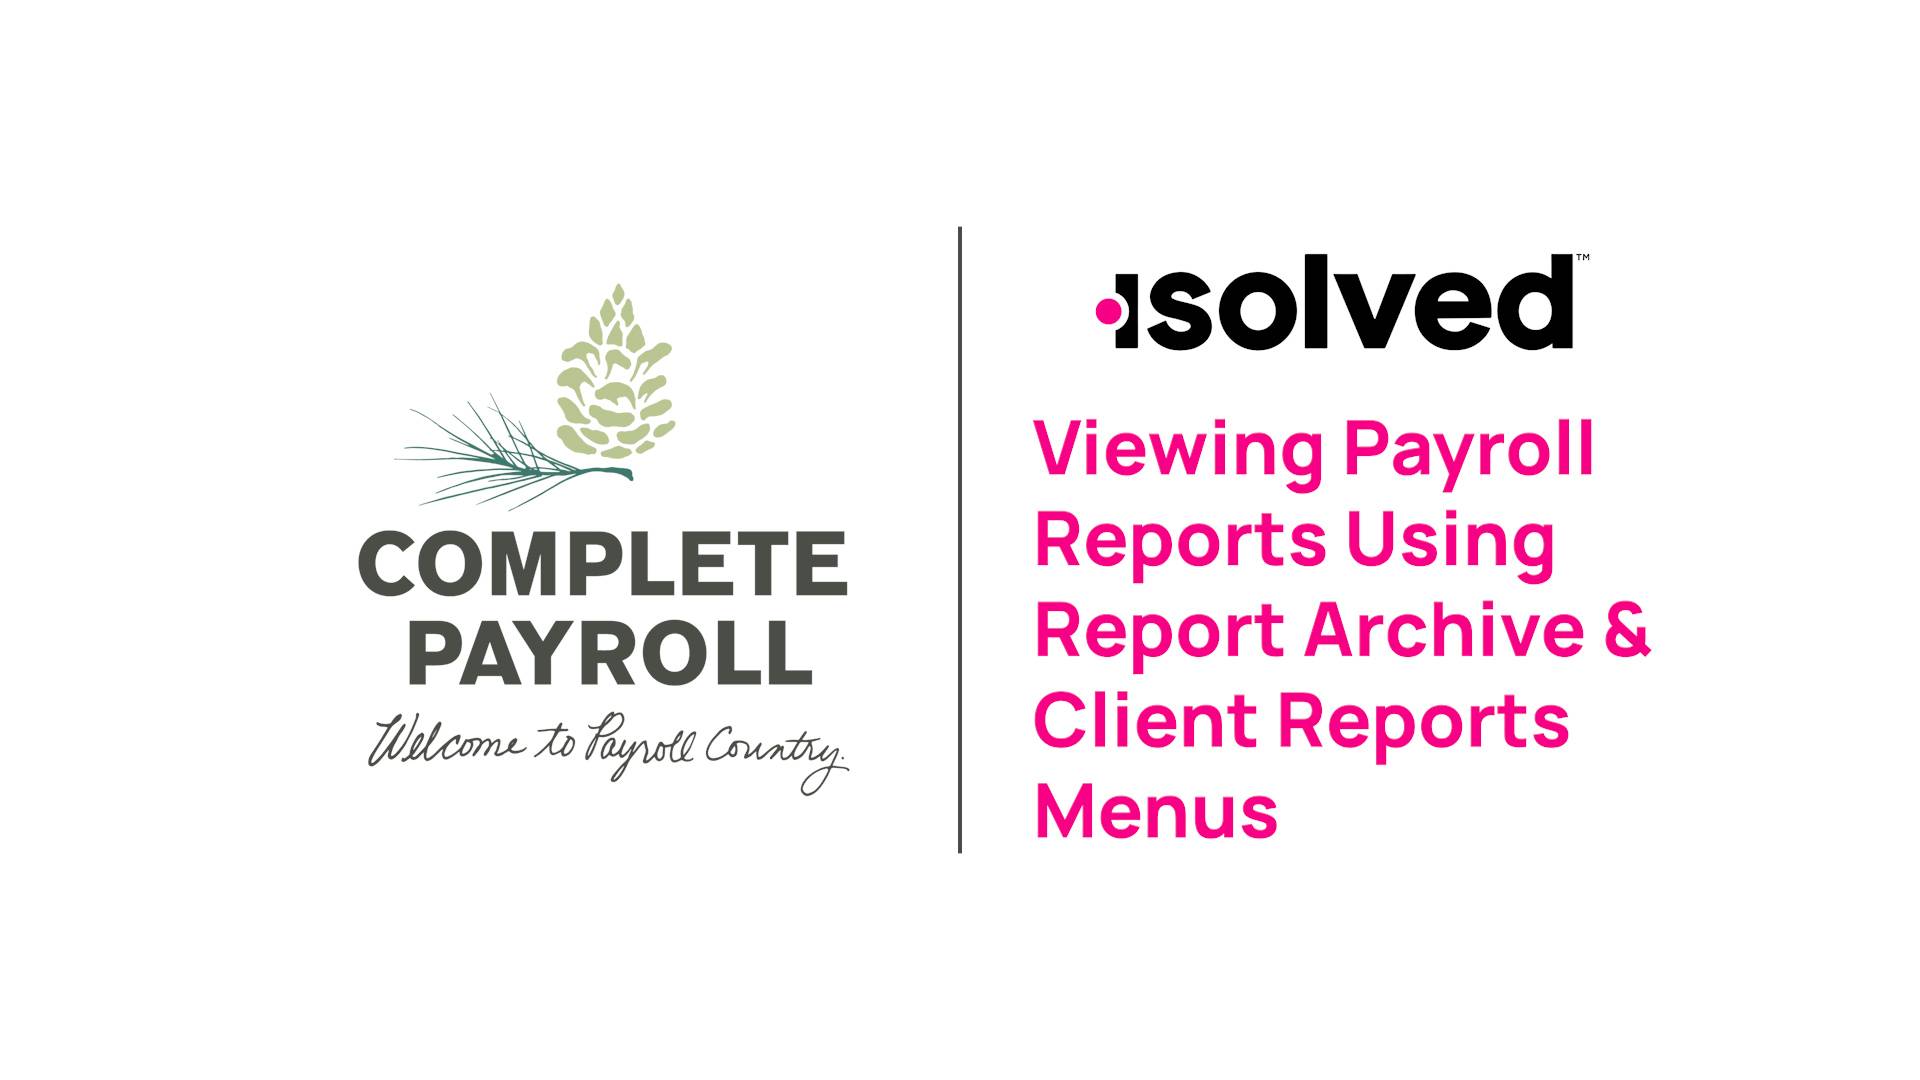 Viewing Payroll Reports Using Report Archive & Client Menus Reporting